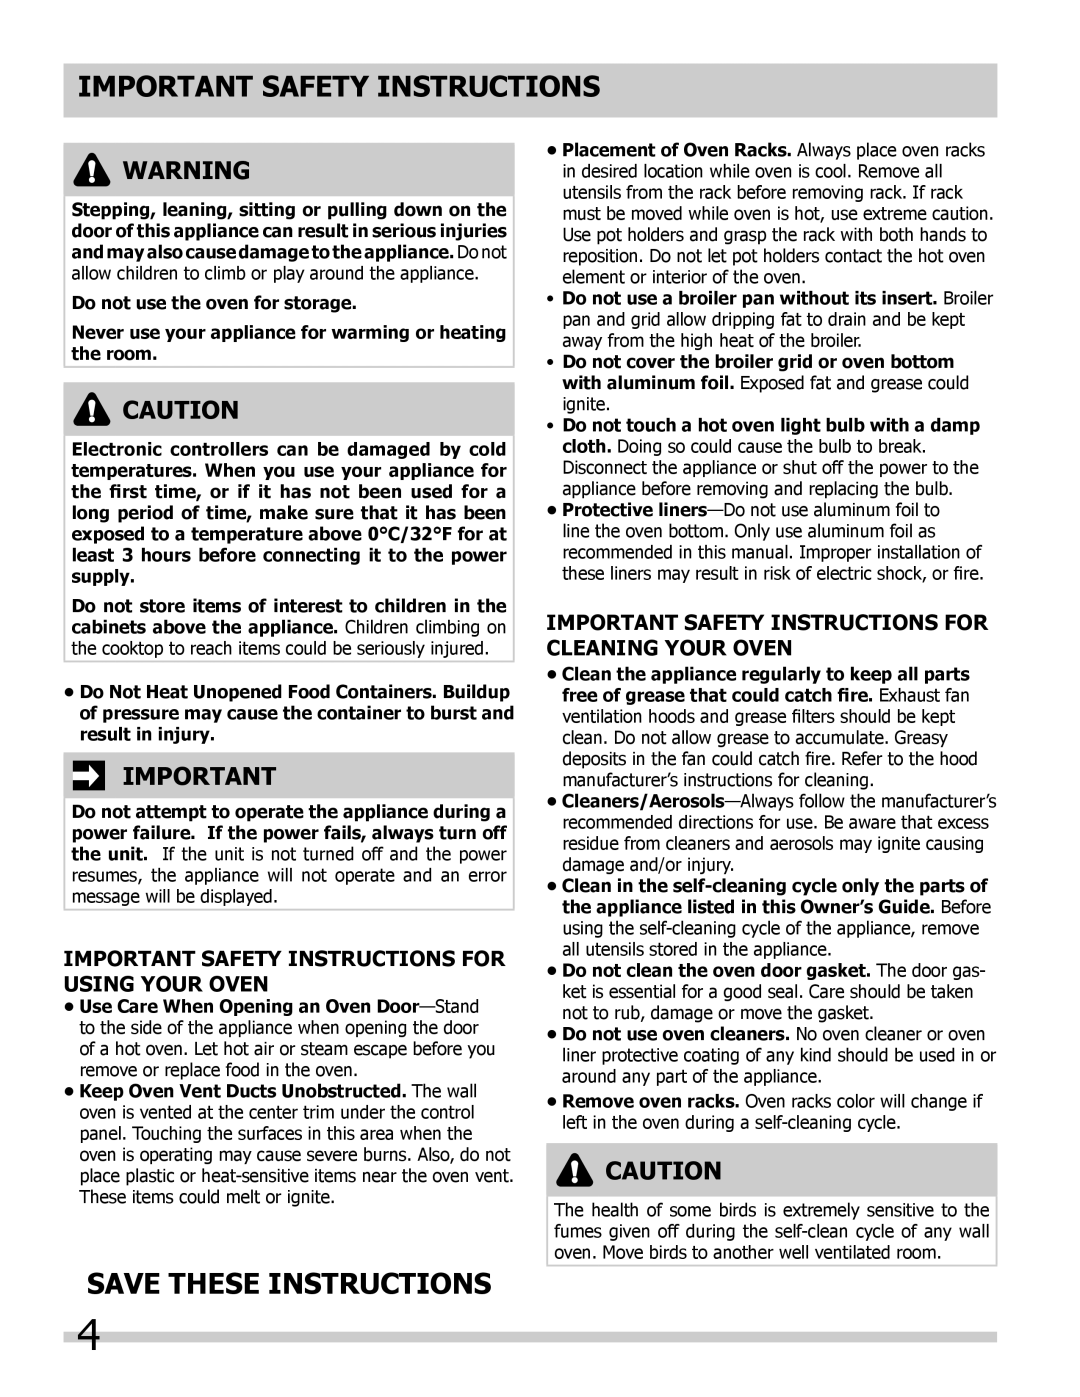 Frigidaire 318205302 manual Save these instructions, Important Safety Instructions For Using Your Oven 